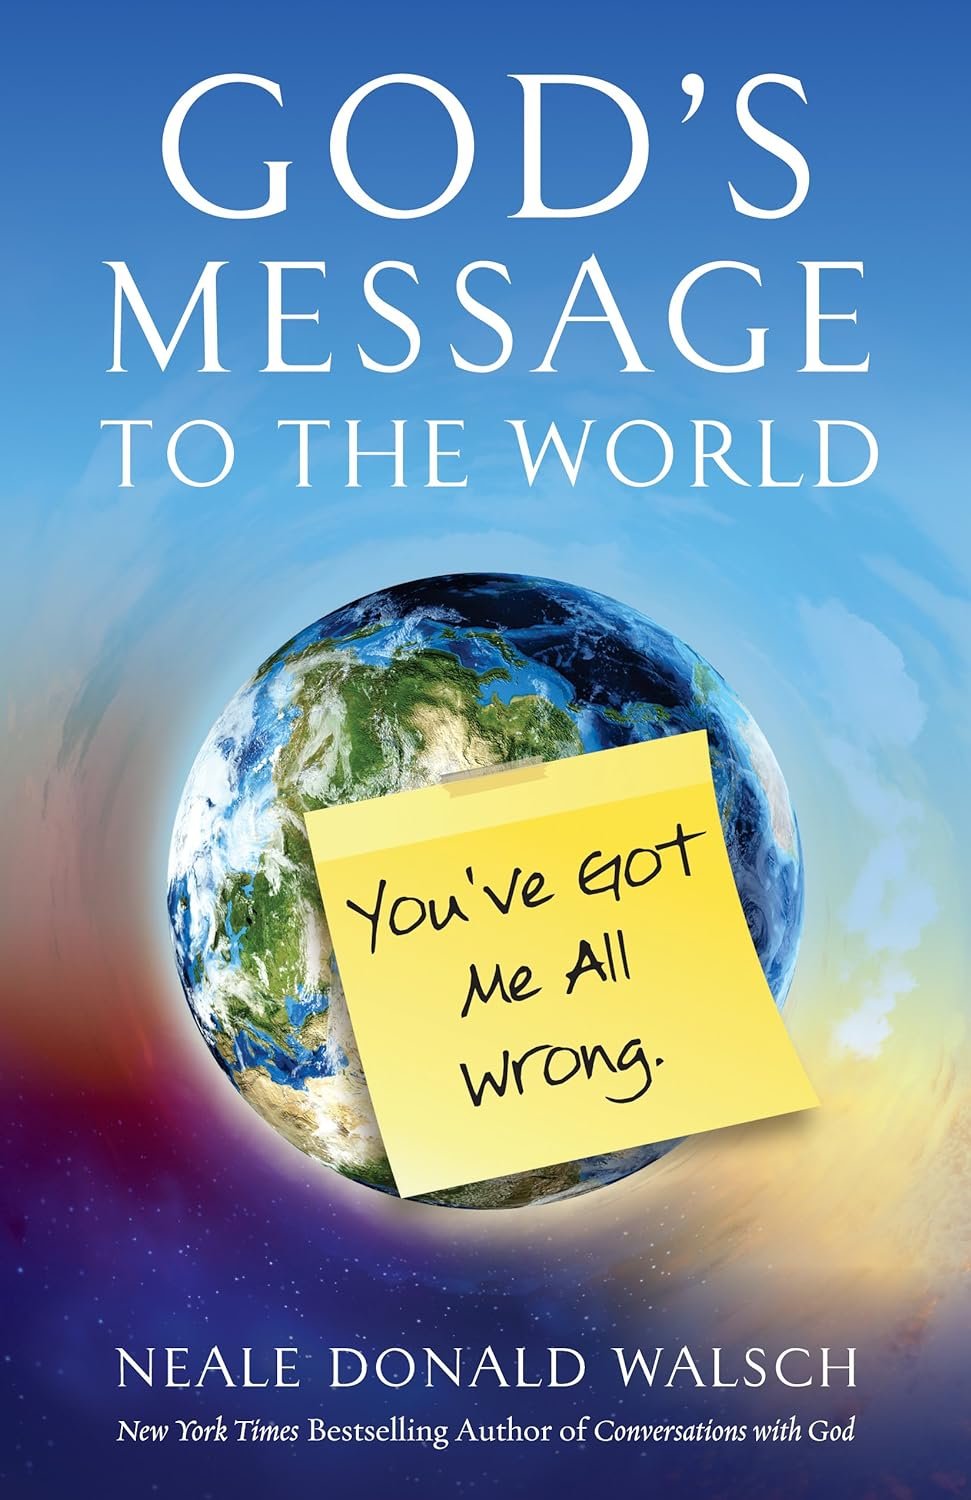 Book cover of "God's Message to the World: You've Got Me All Wrong" by Neale Donald Walsch, featuring Earth in space with a sticky note saying "You've got me all wrong.